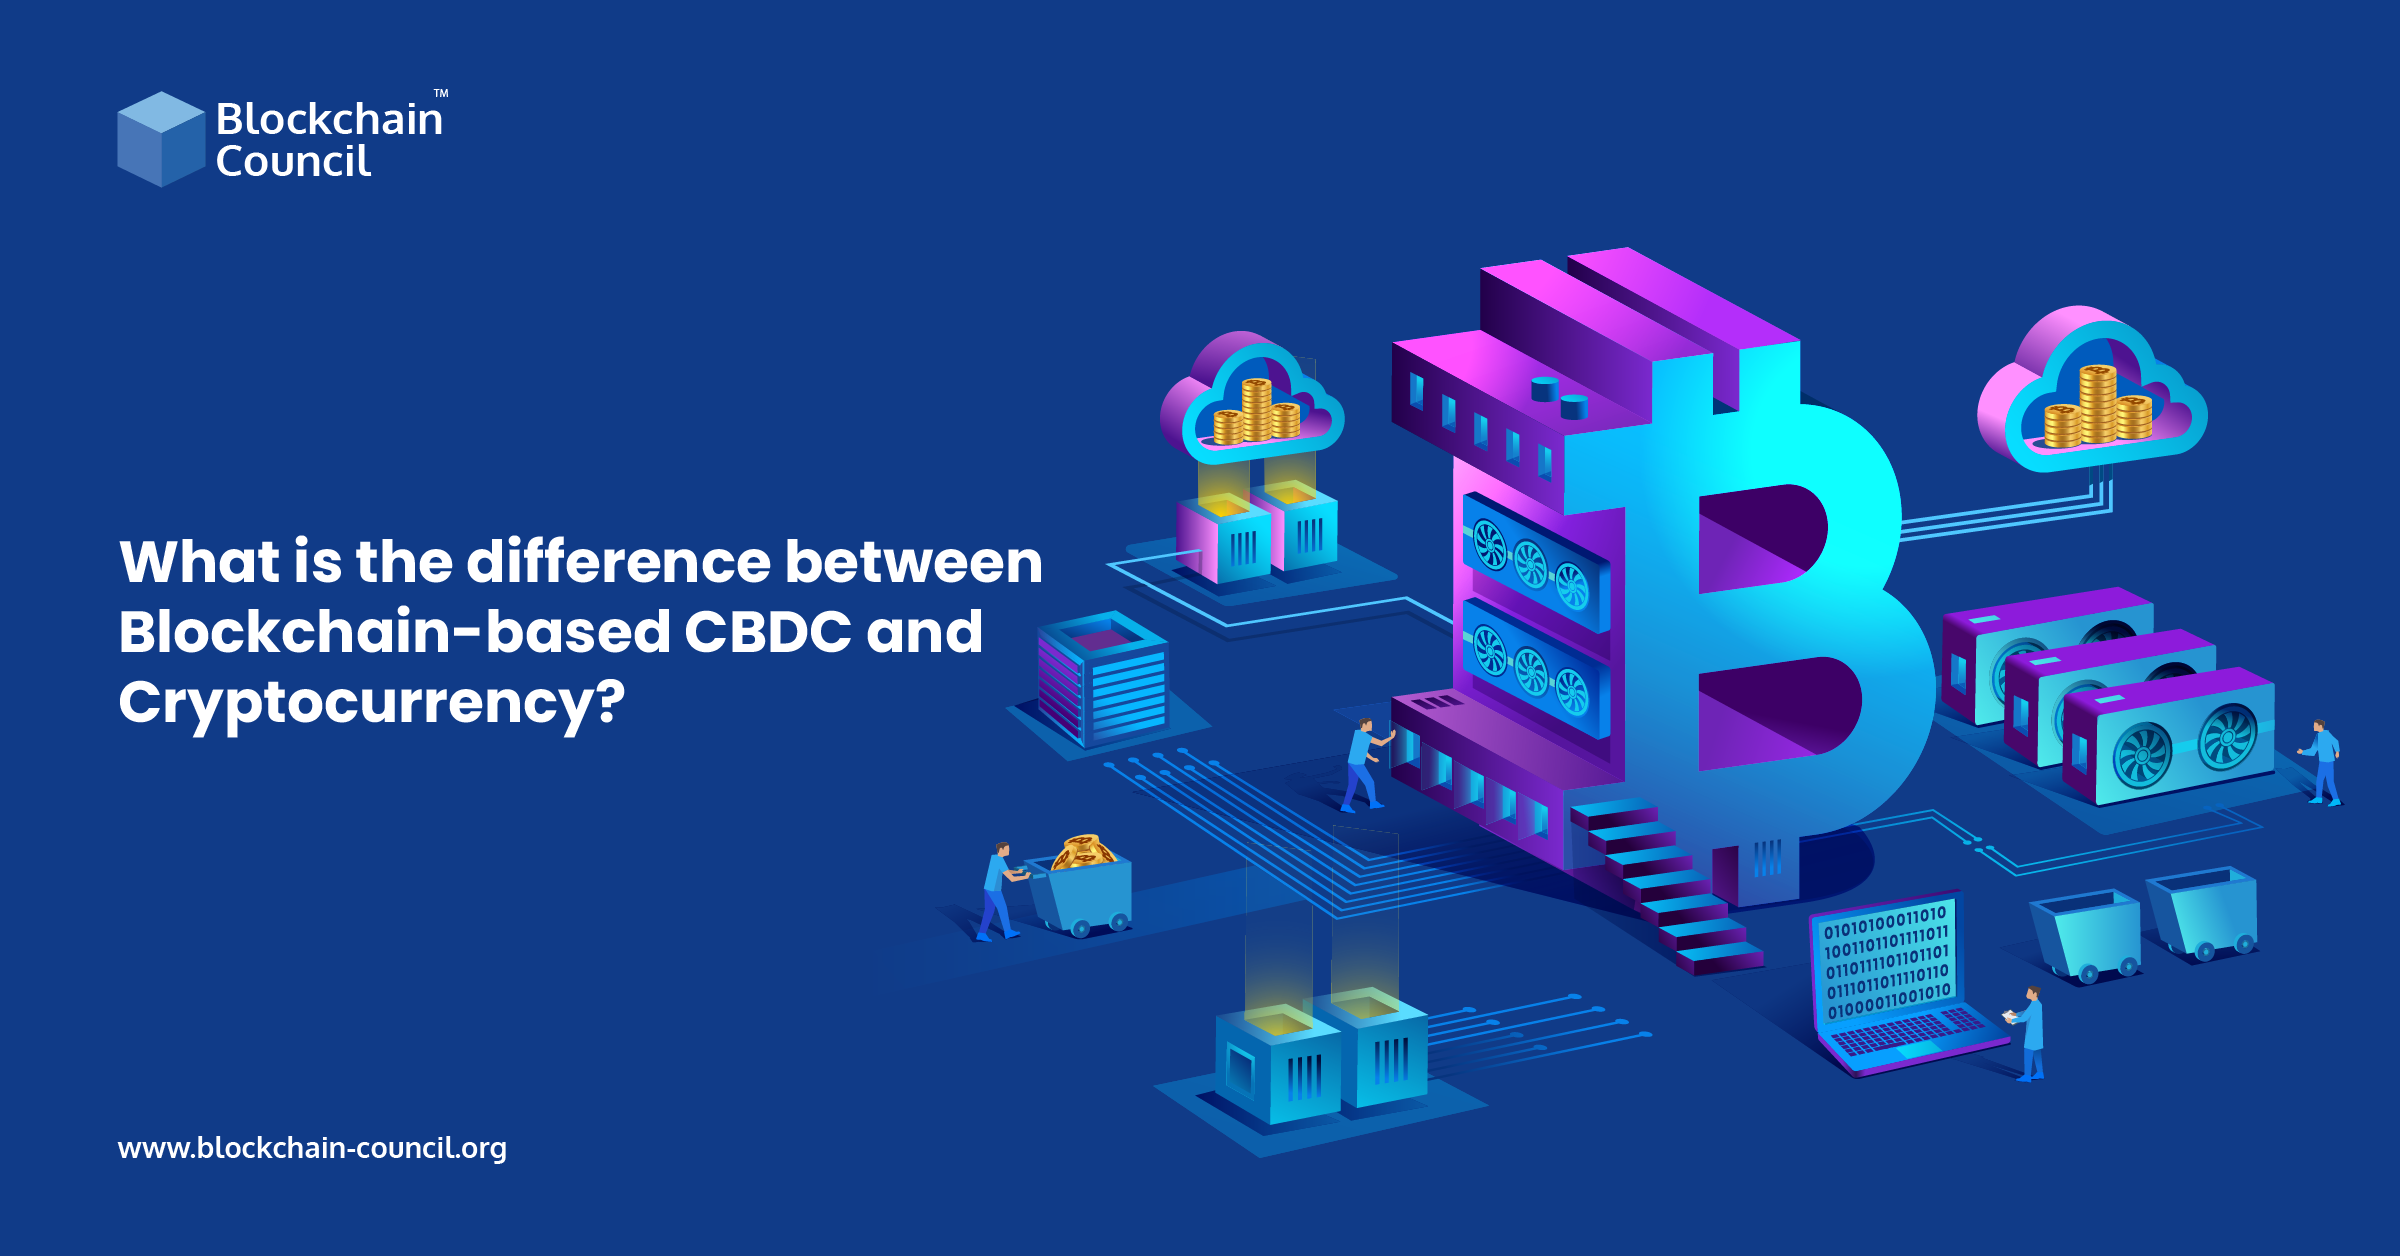 What is the difference between Blockchain-based CBDC and Cryptocurrency?